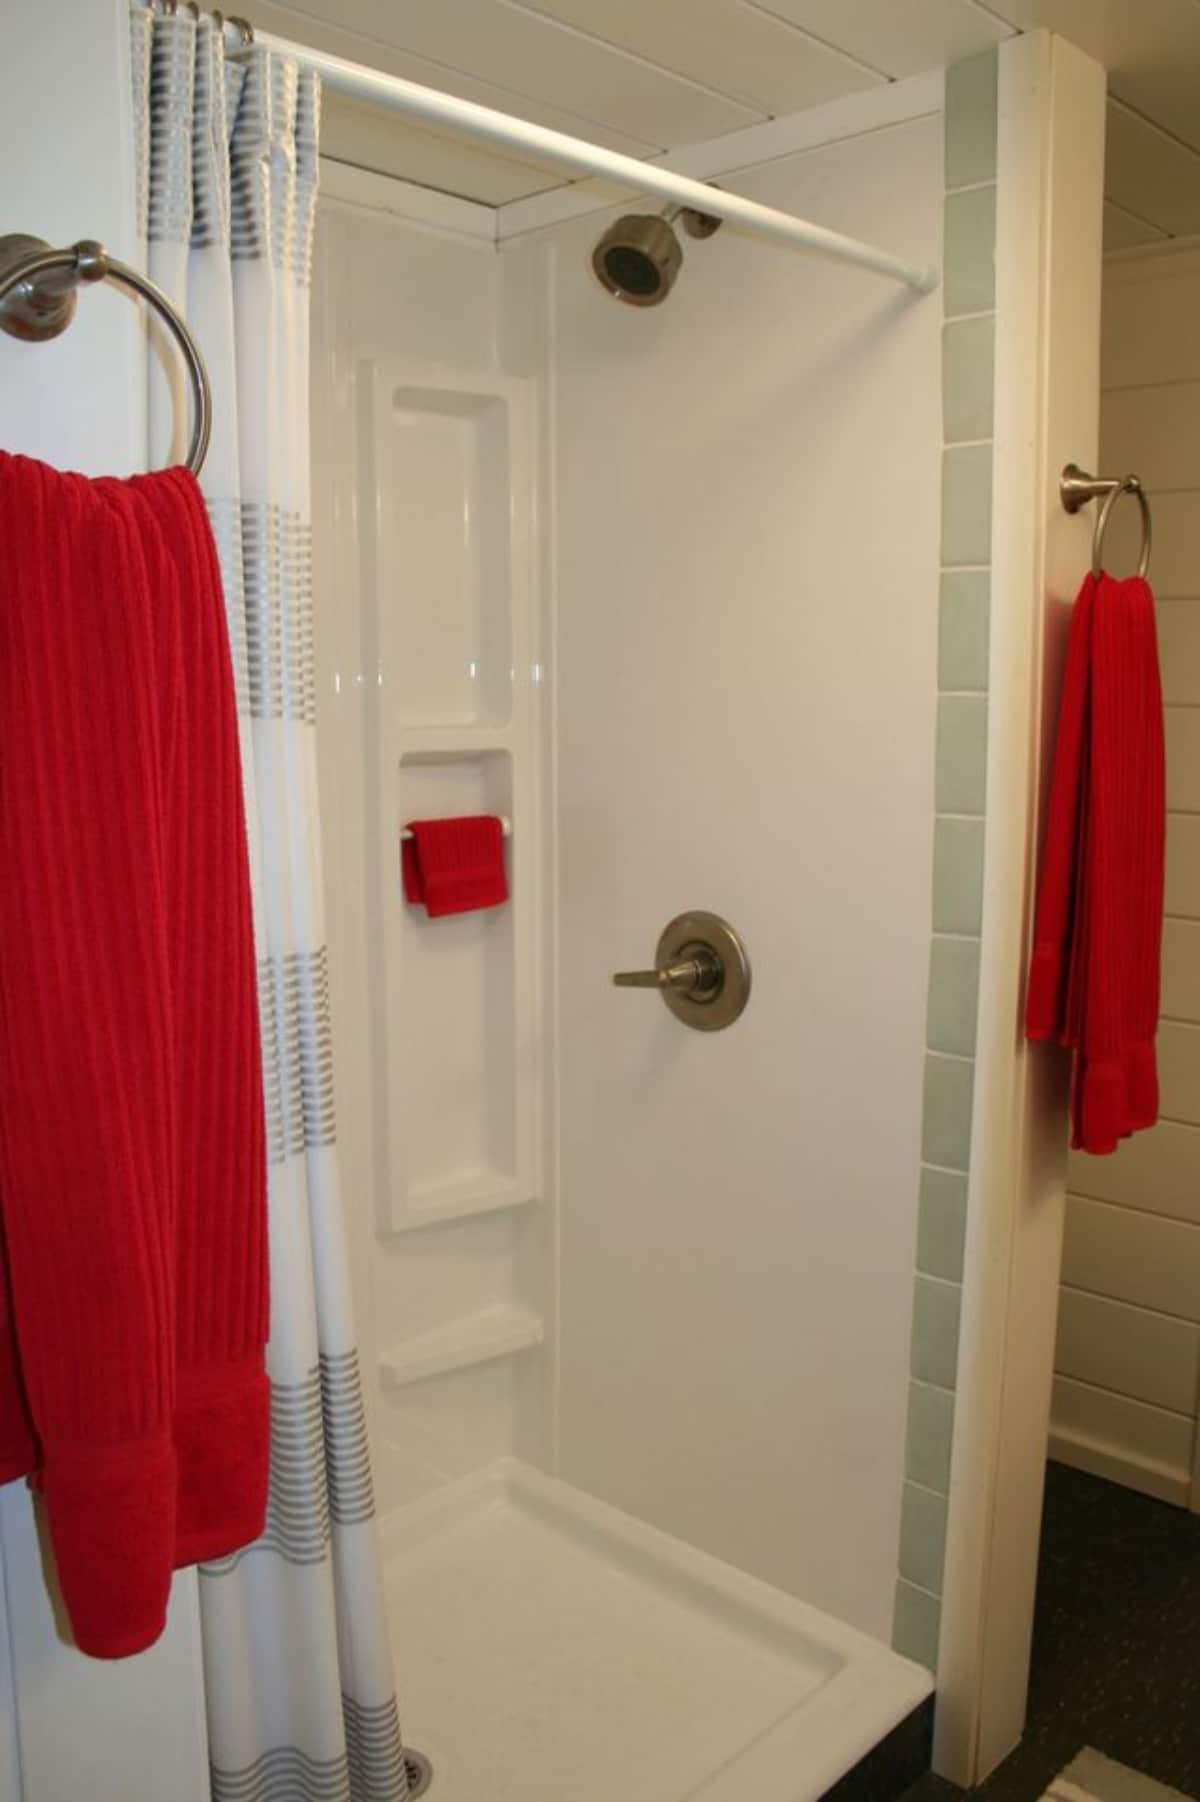 Shower area of 40' Shipping Container Tiny House